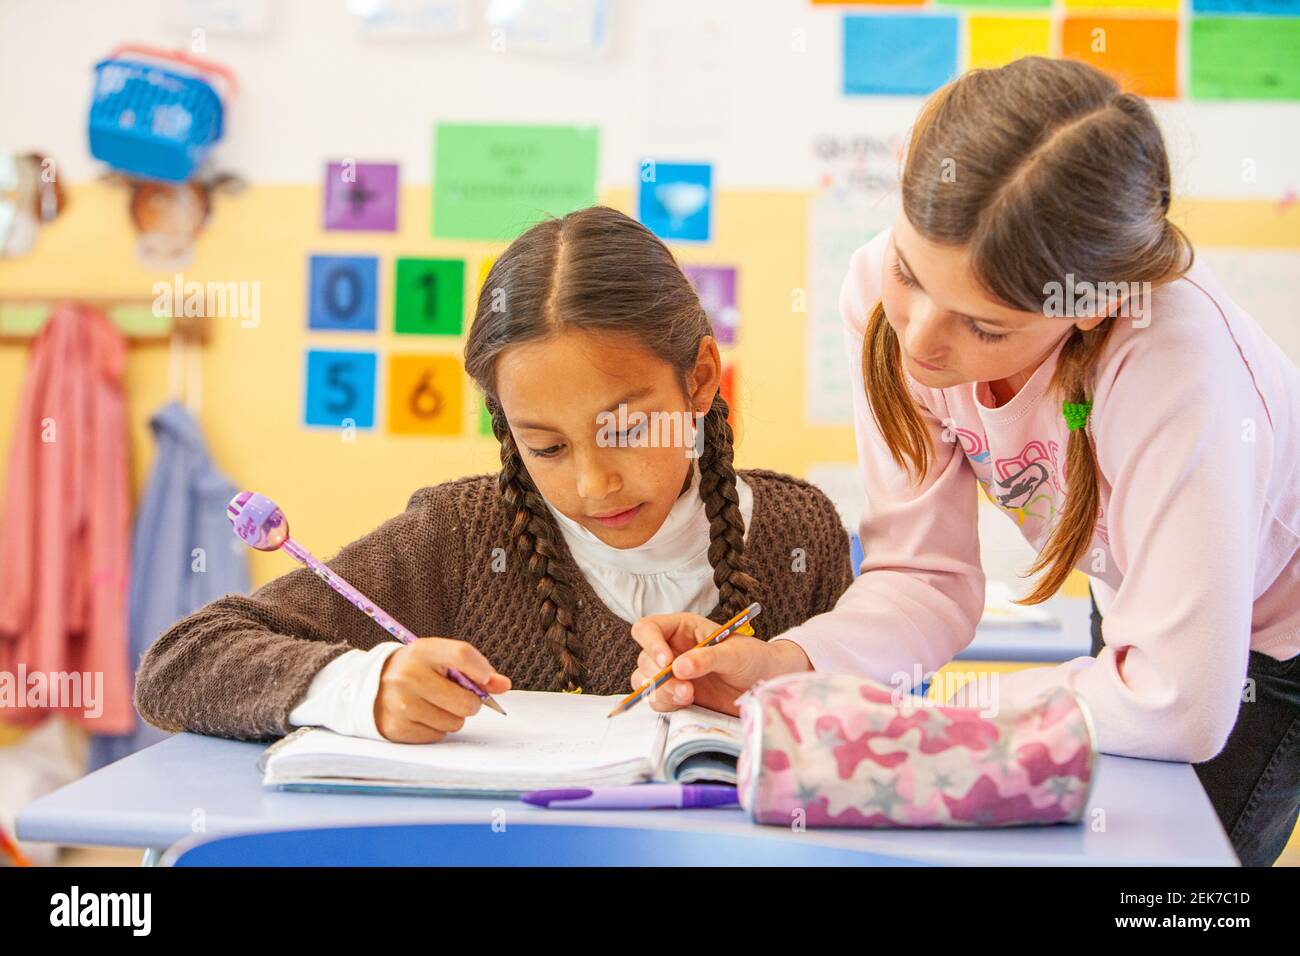 Young girls helping each other in a school classroom Stock Photo